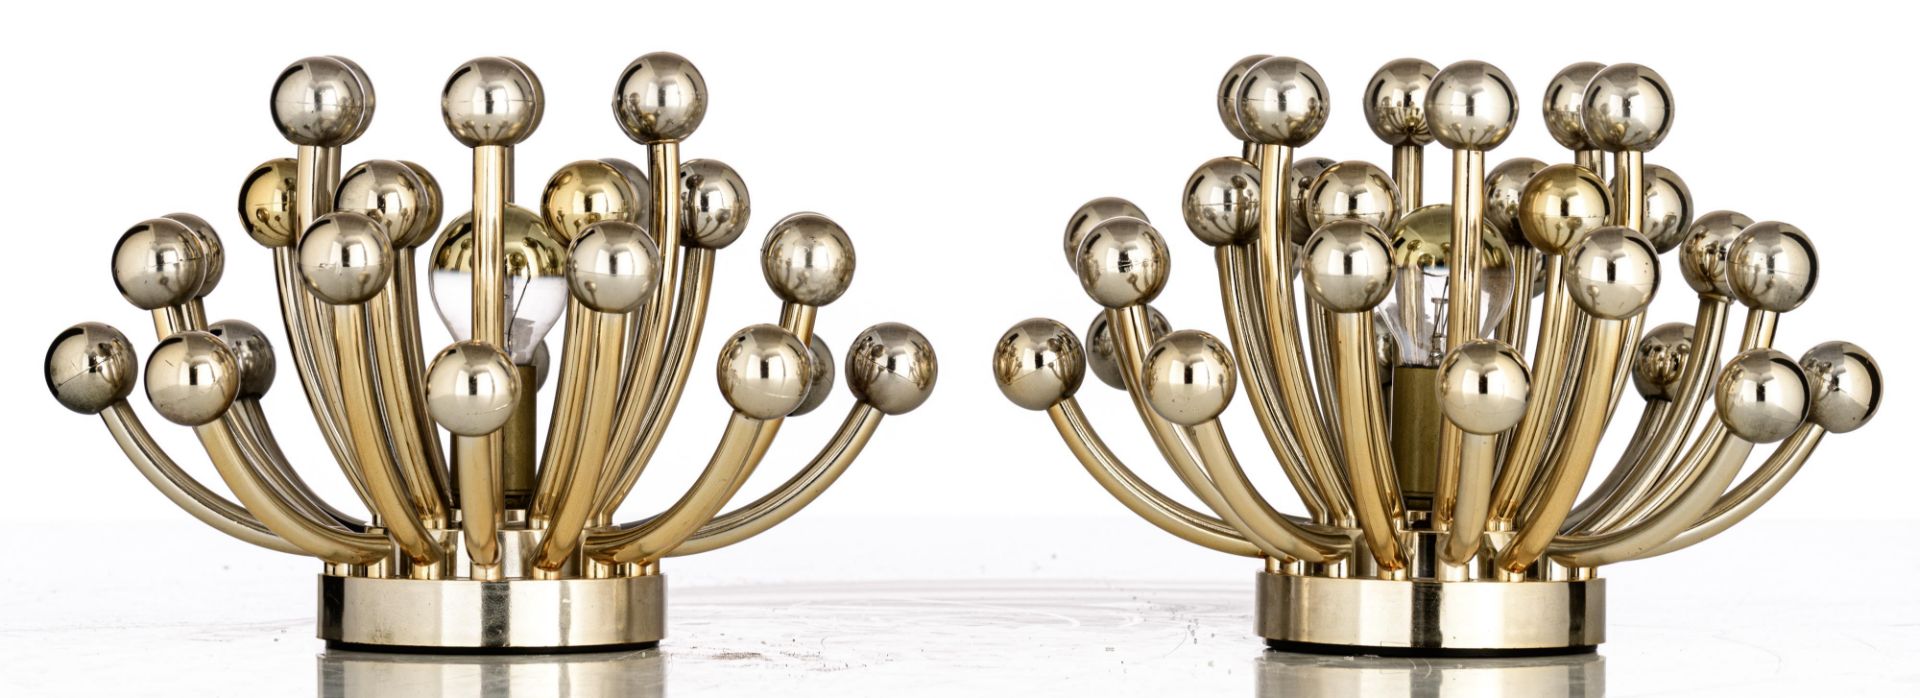 A pair of Pistillino wall or ceiling lights, Studio Tetrarch for Valenti & Co., Italy, chrome plated - Bild 6 aus 6